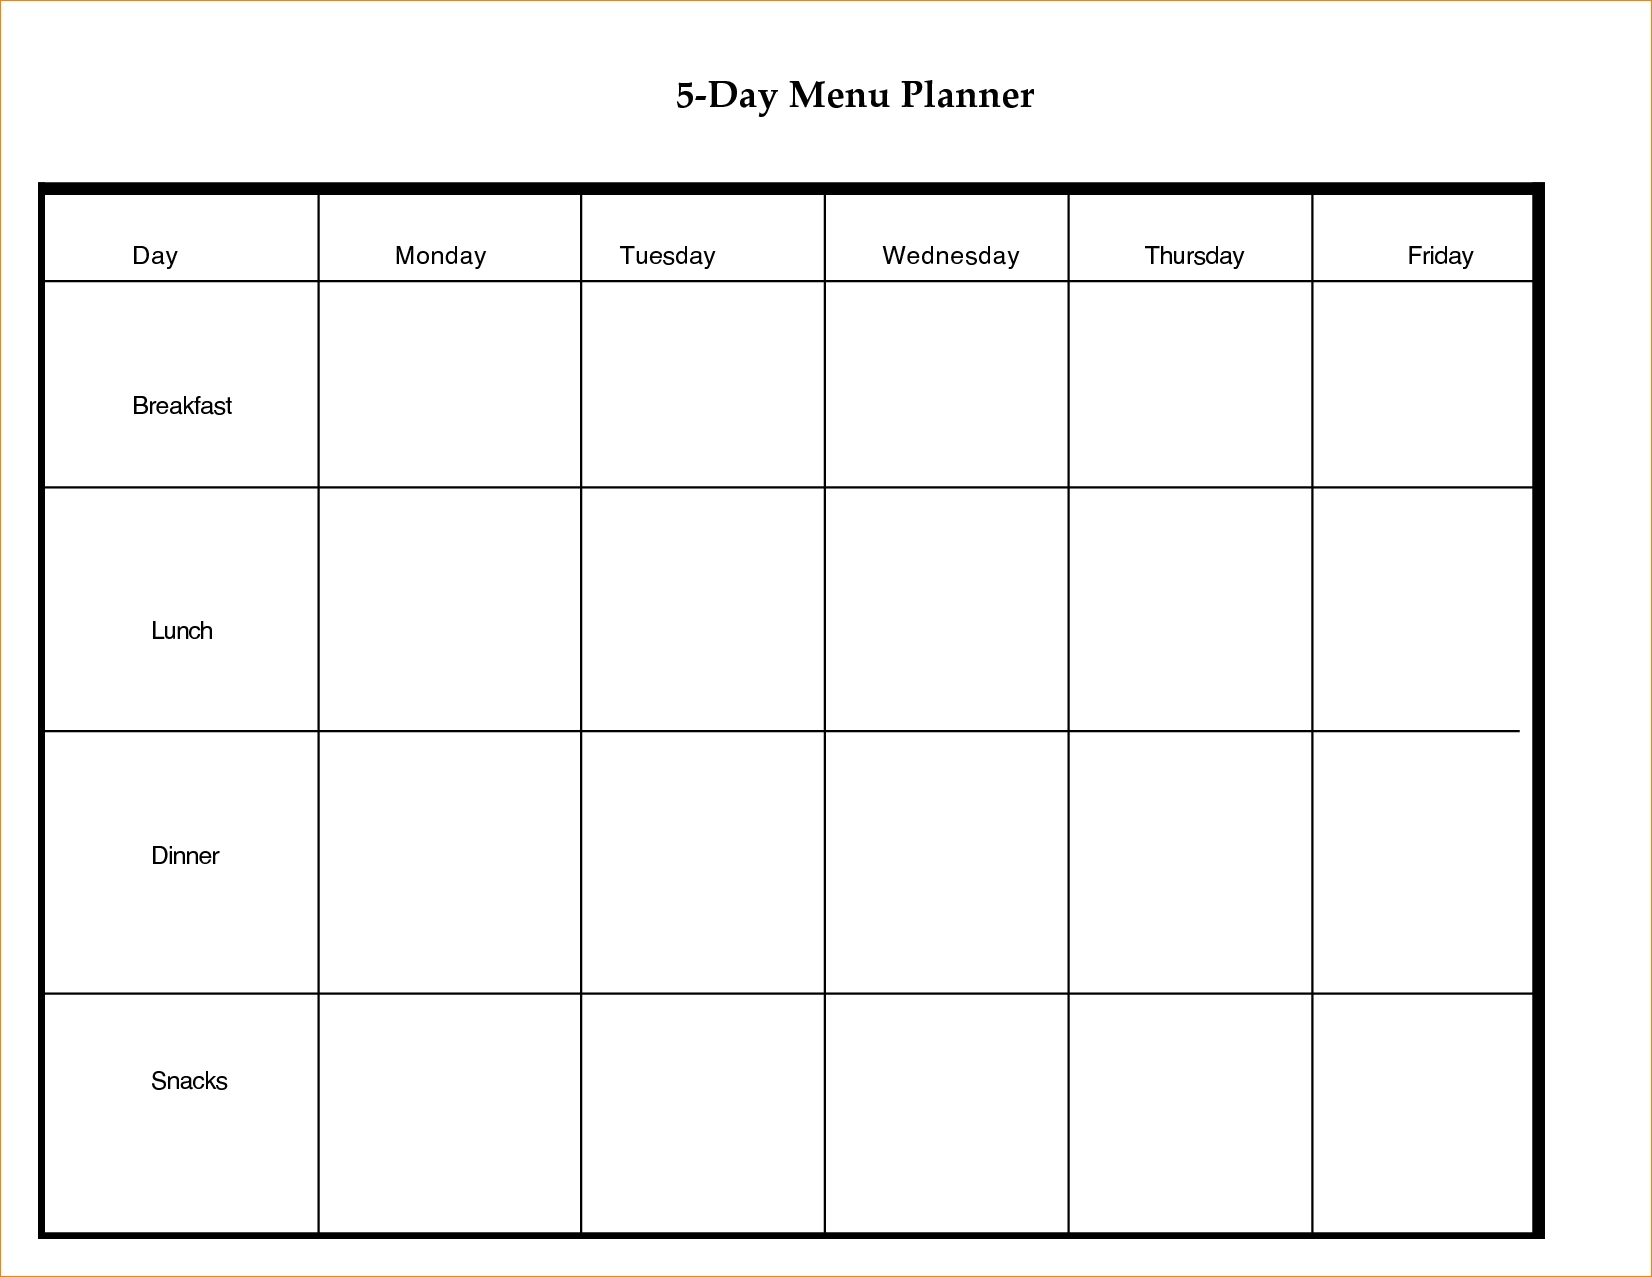 5 Day Weekly Timetable Blank 6 Periods | Template Calendar Printable inside 5 Day Weekly Timetable Blank 6 Periods